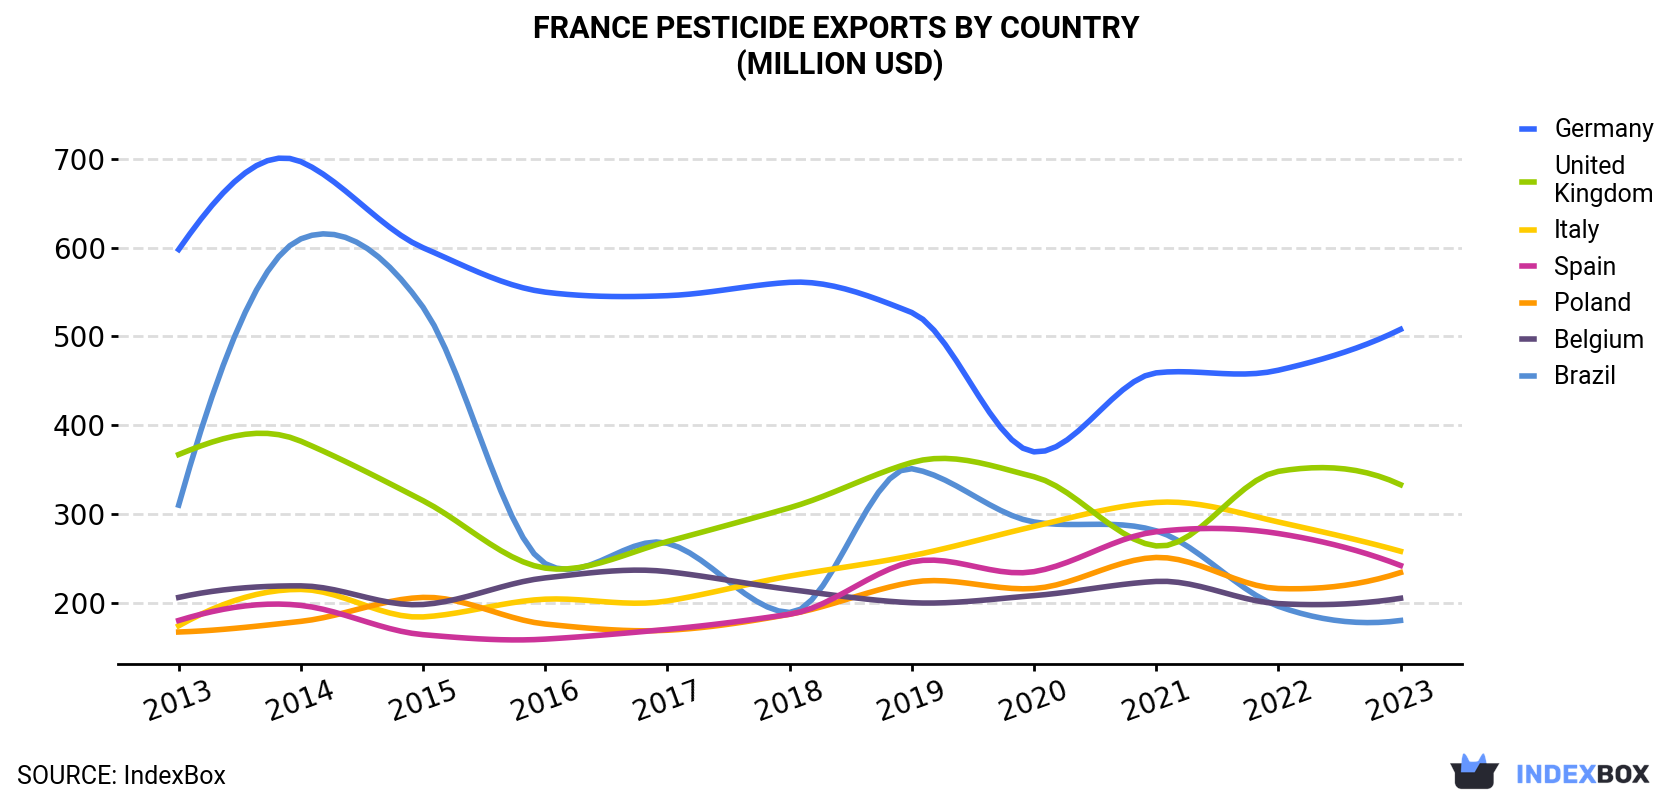 France Pesticide Exports By Country (Million USD)